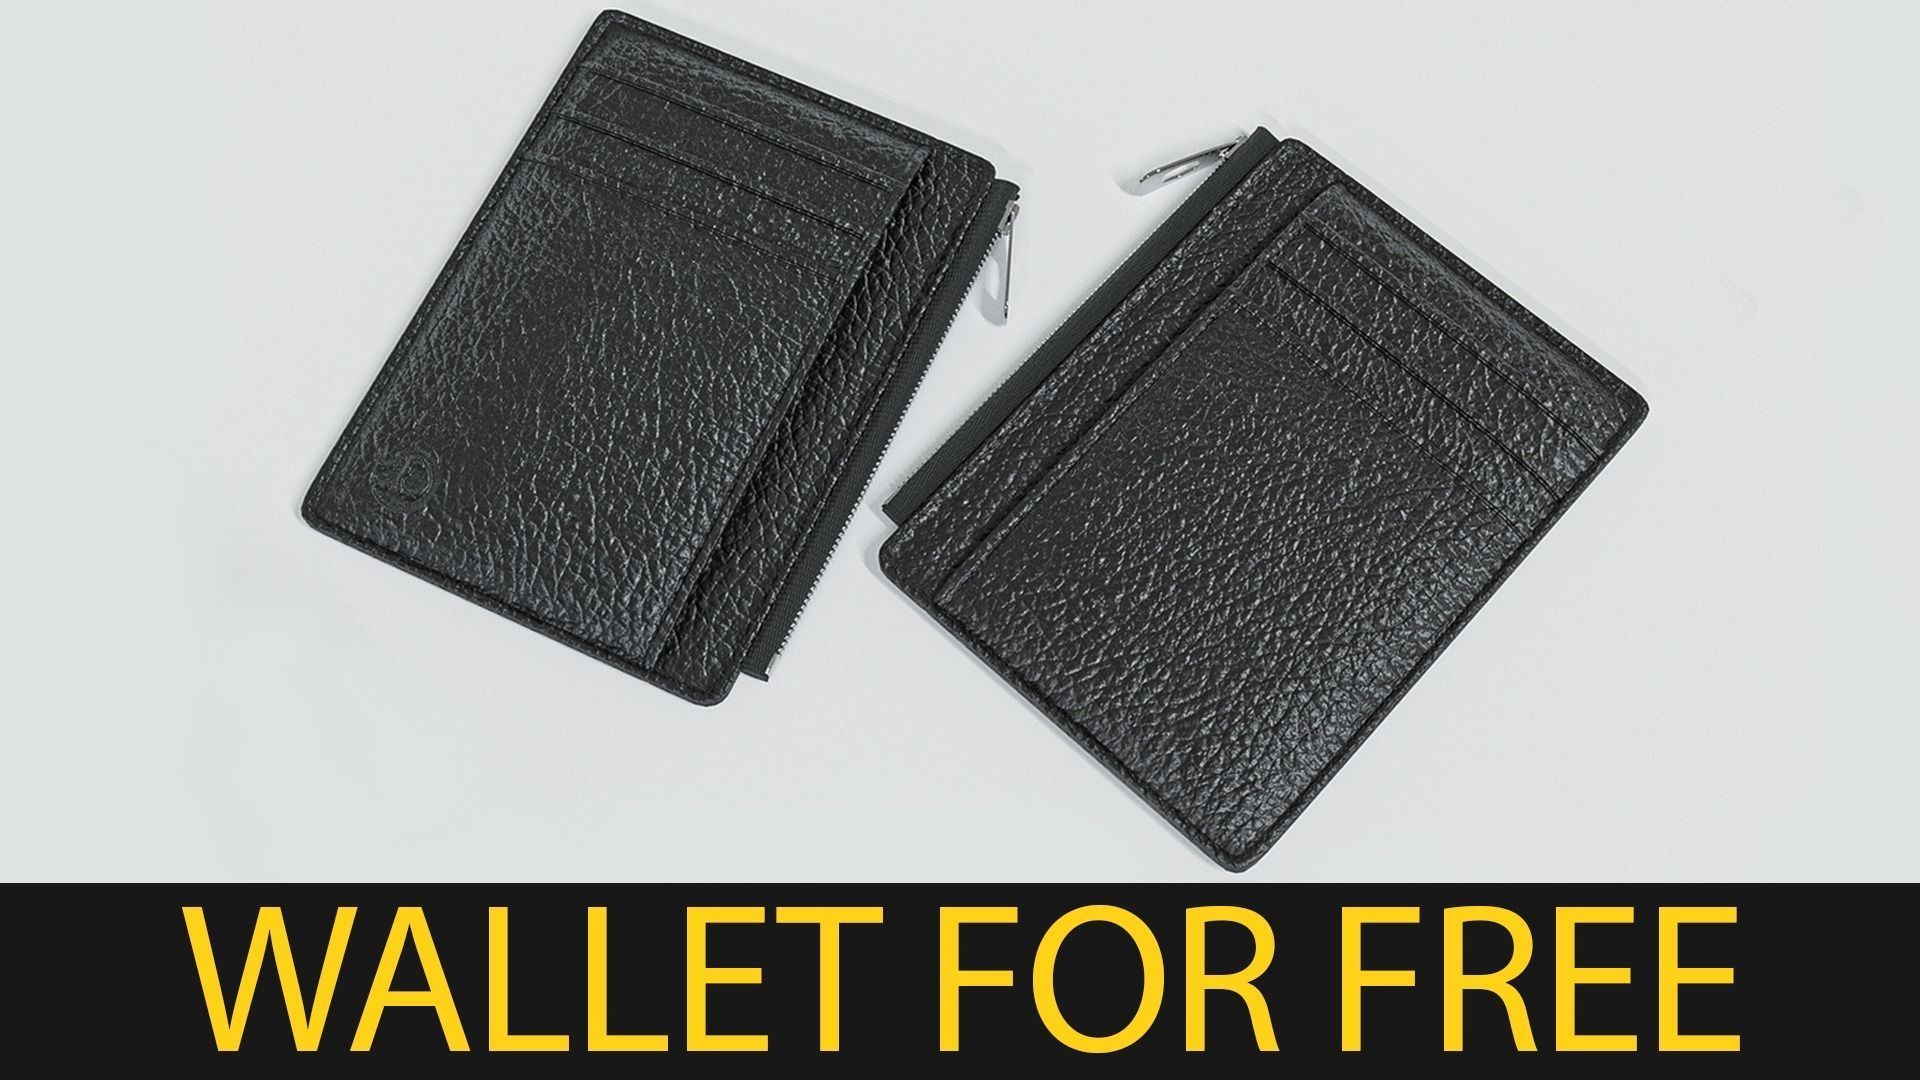 Wallet for free.